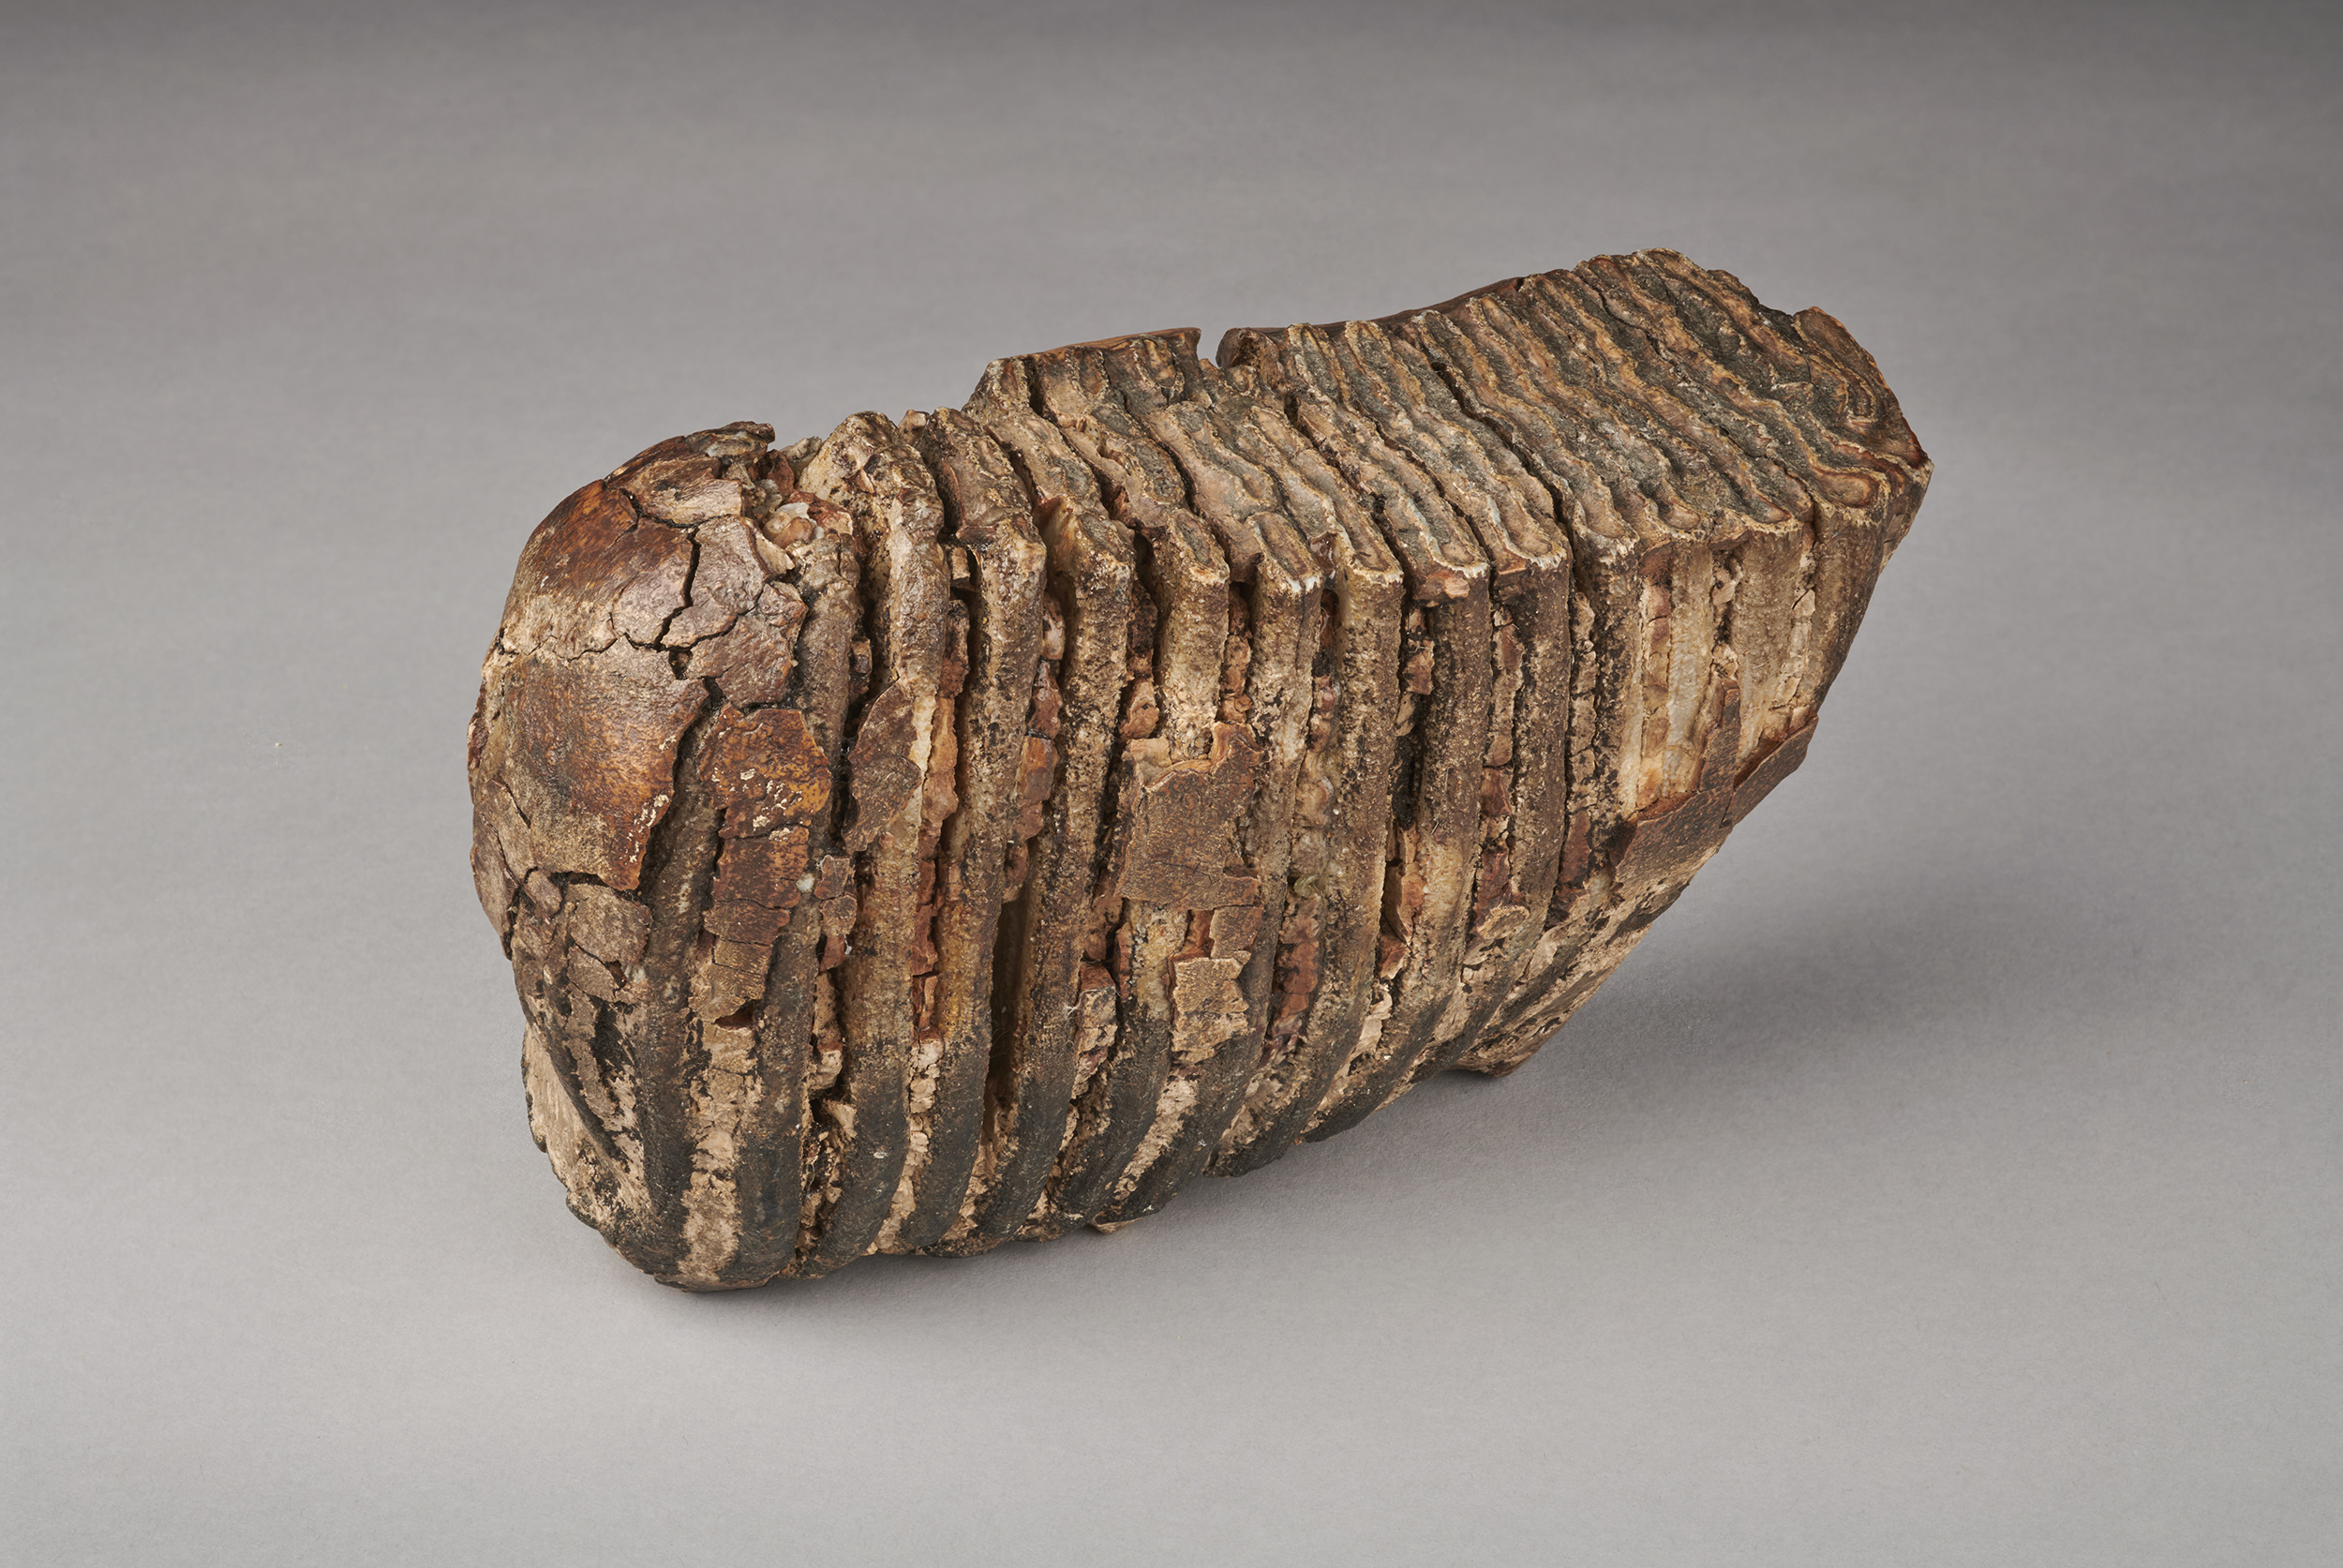 A large segmented fossil from the Herbert collection - but you'll have to join the talk to find out what it is!